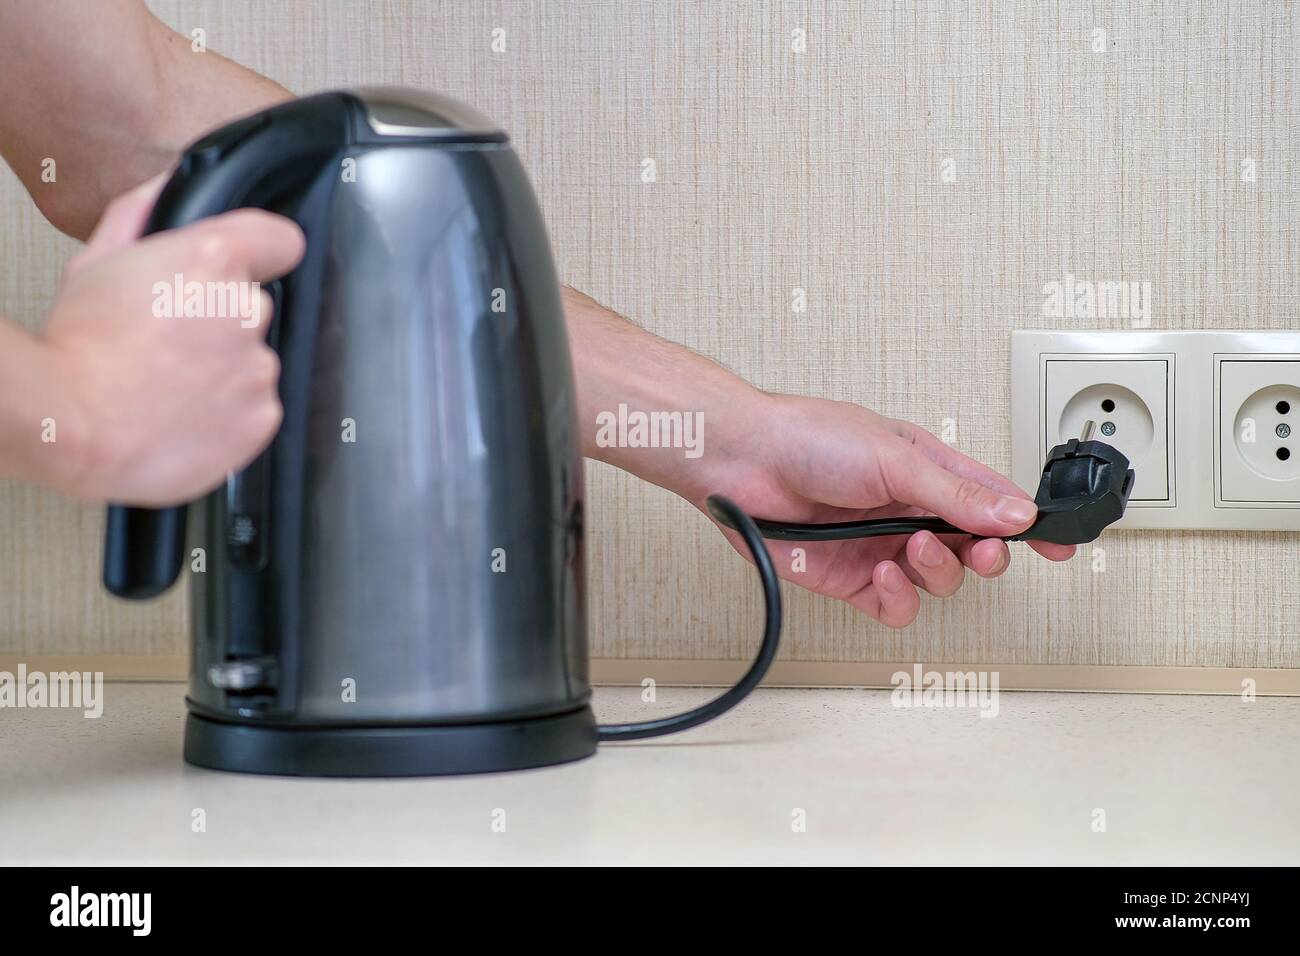 The man holds the electric power in his hand and connects the kettle to the outlet Stock Photo